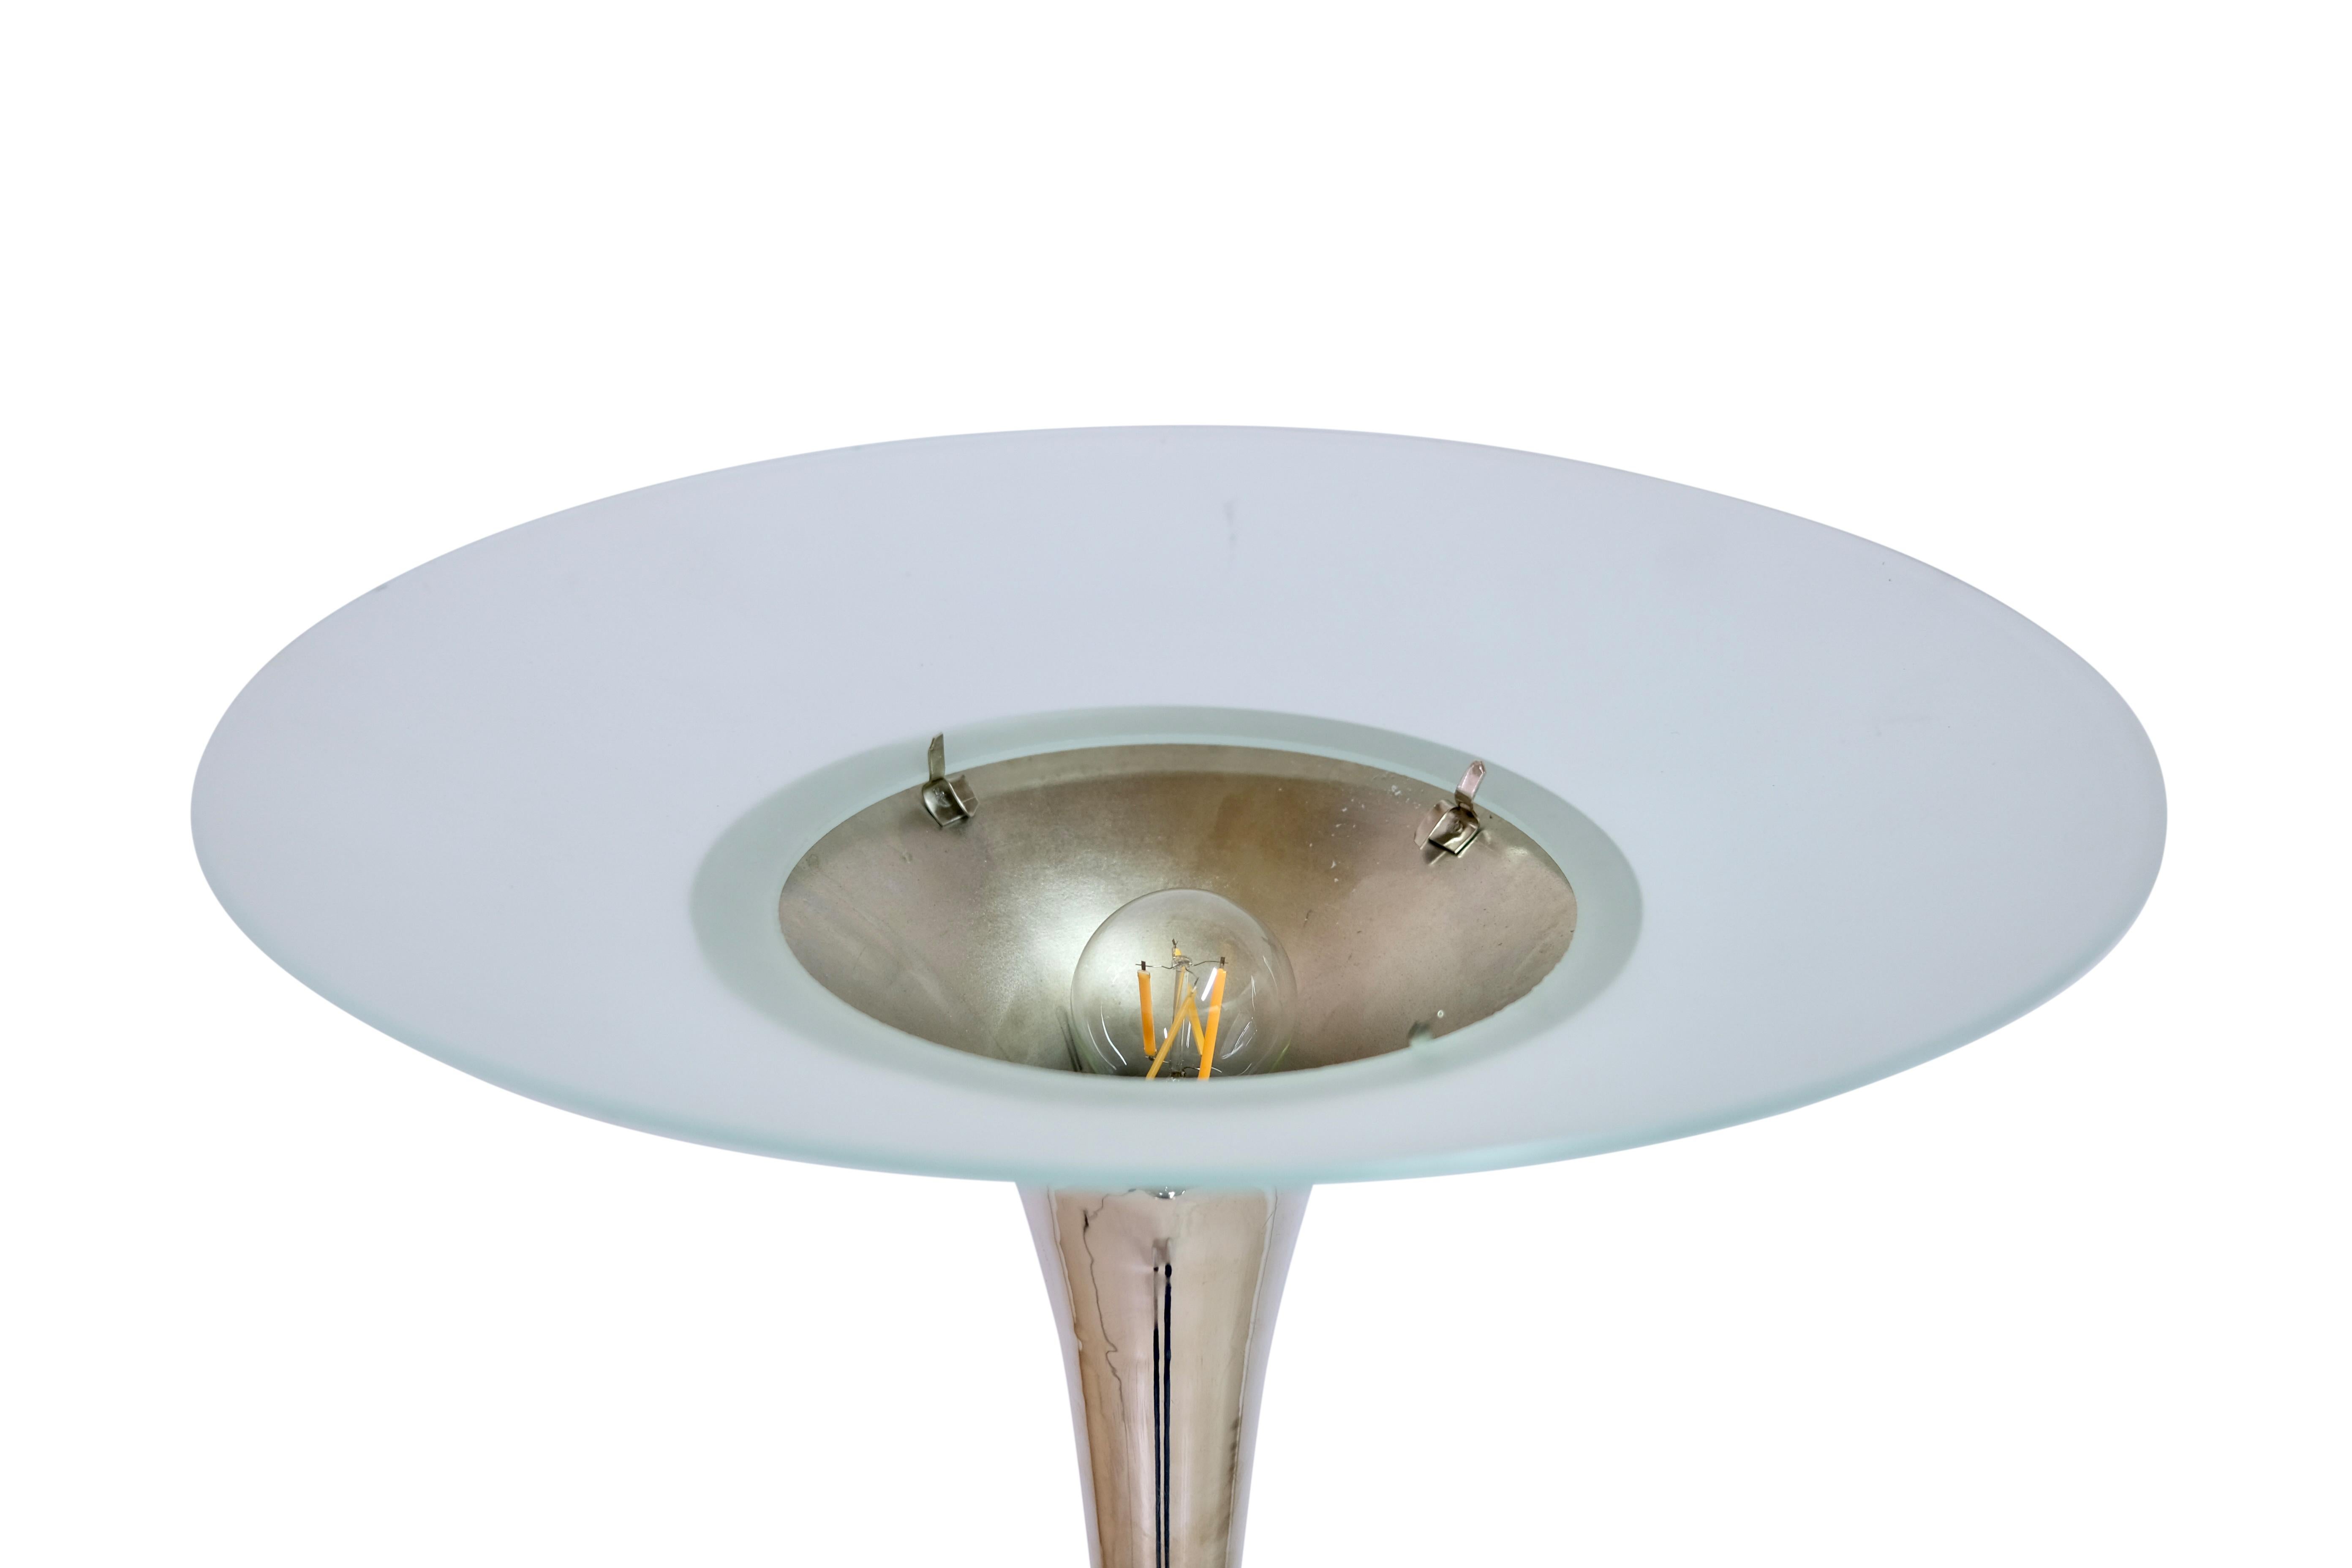 Polished Funnel Shaped French 1930s Art Deco Floor Lamp in Chrome with Orange Glass Rings For Sale